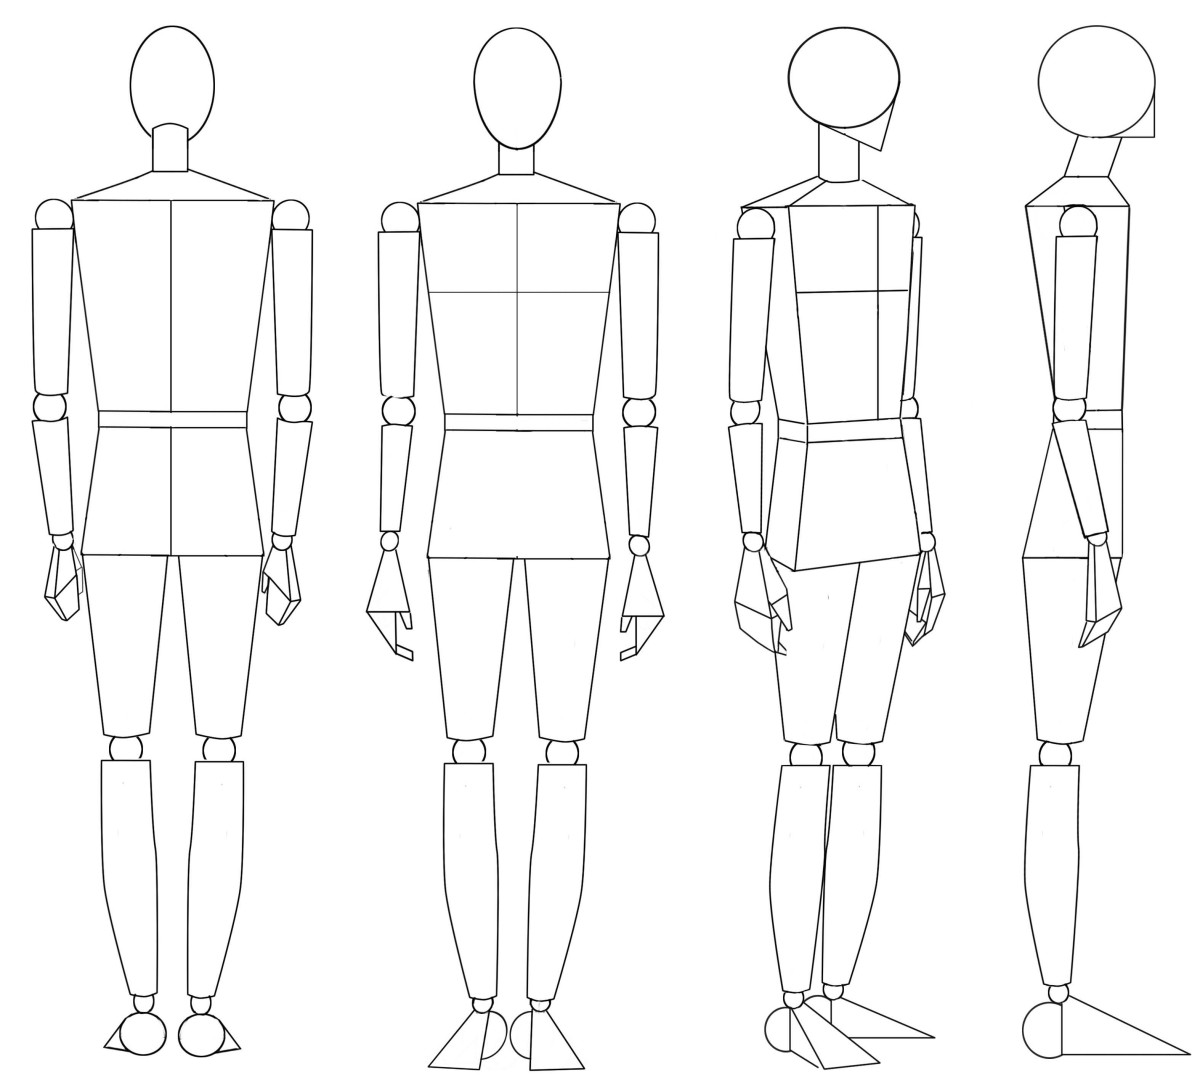 Drawing the Human Figure: Angles & Proportions | HubPages